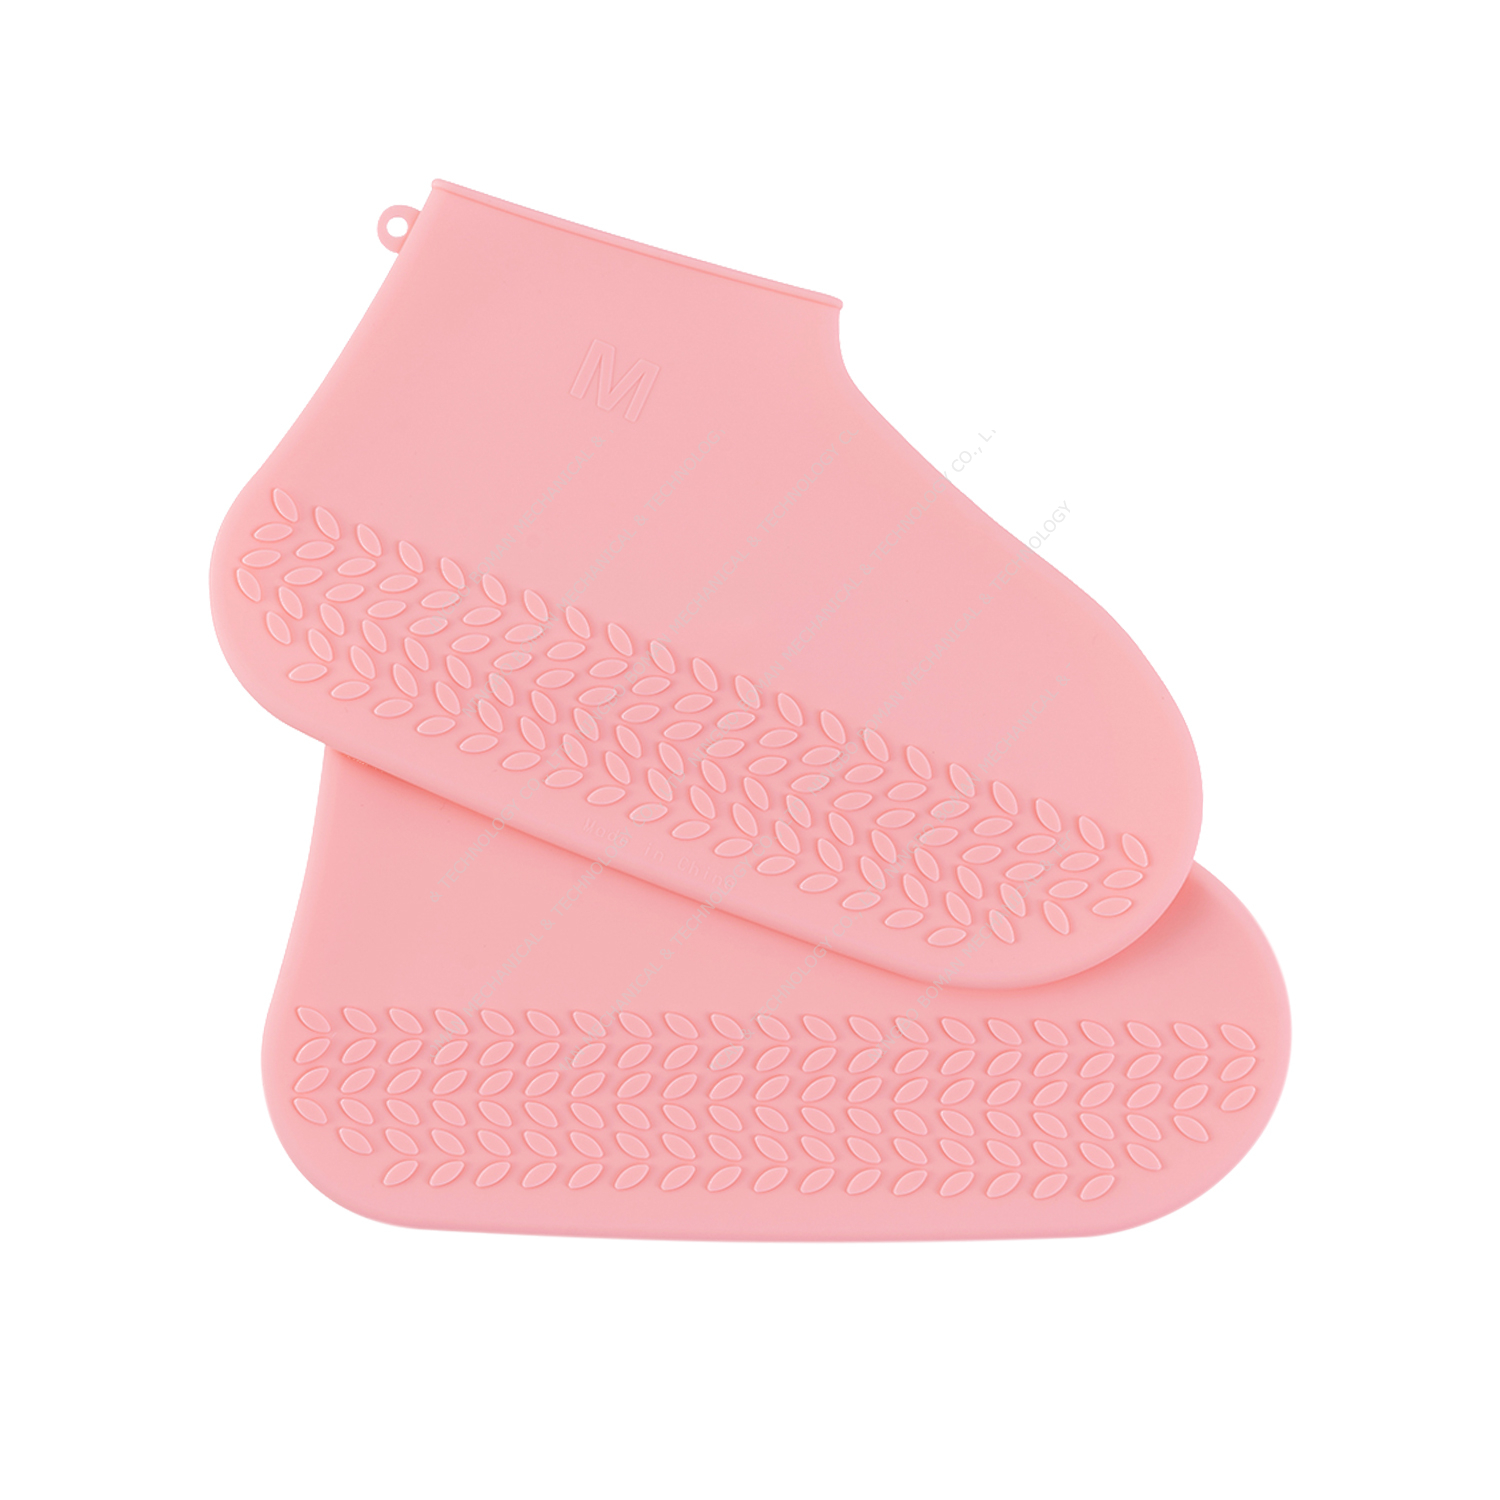 Silicone Waterproof Rubber Shoe Cover